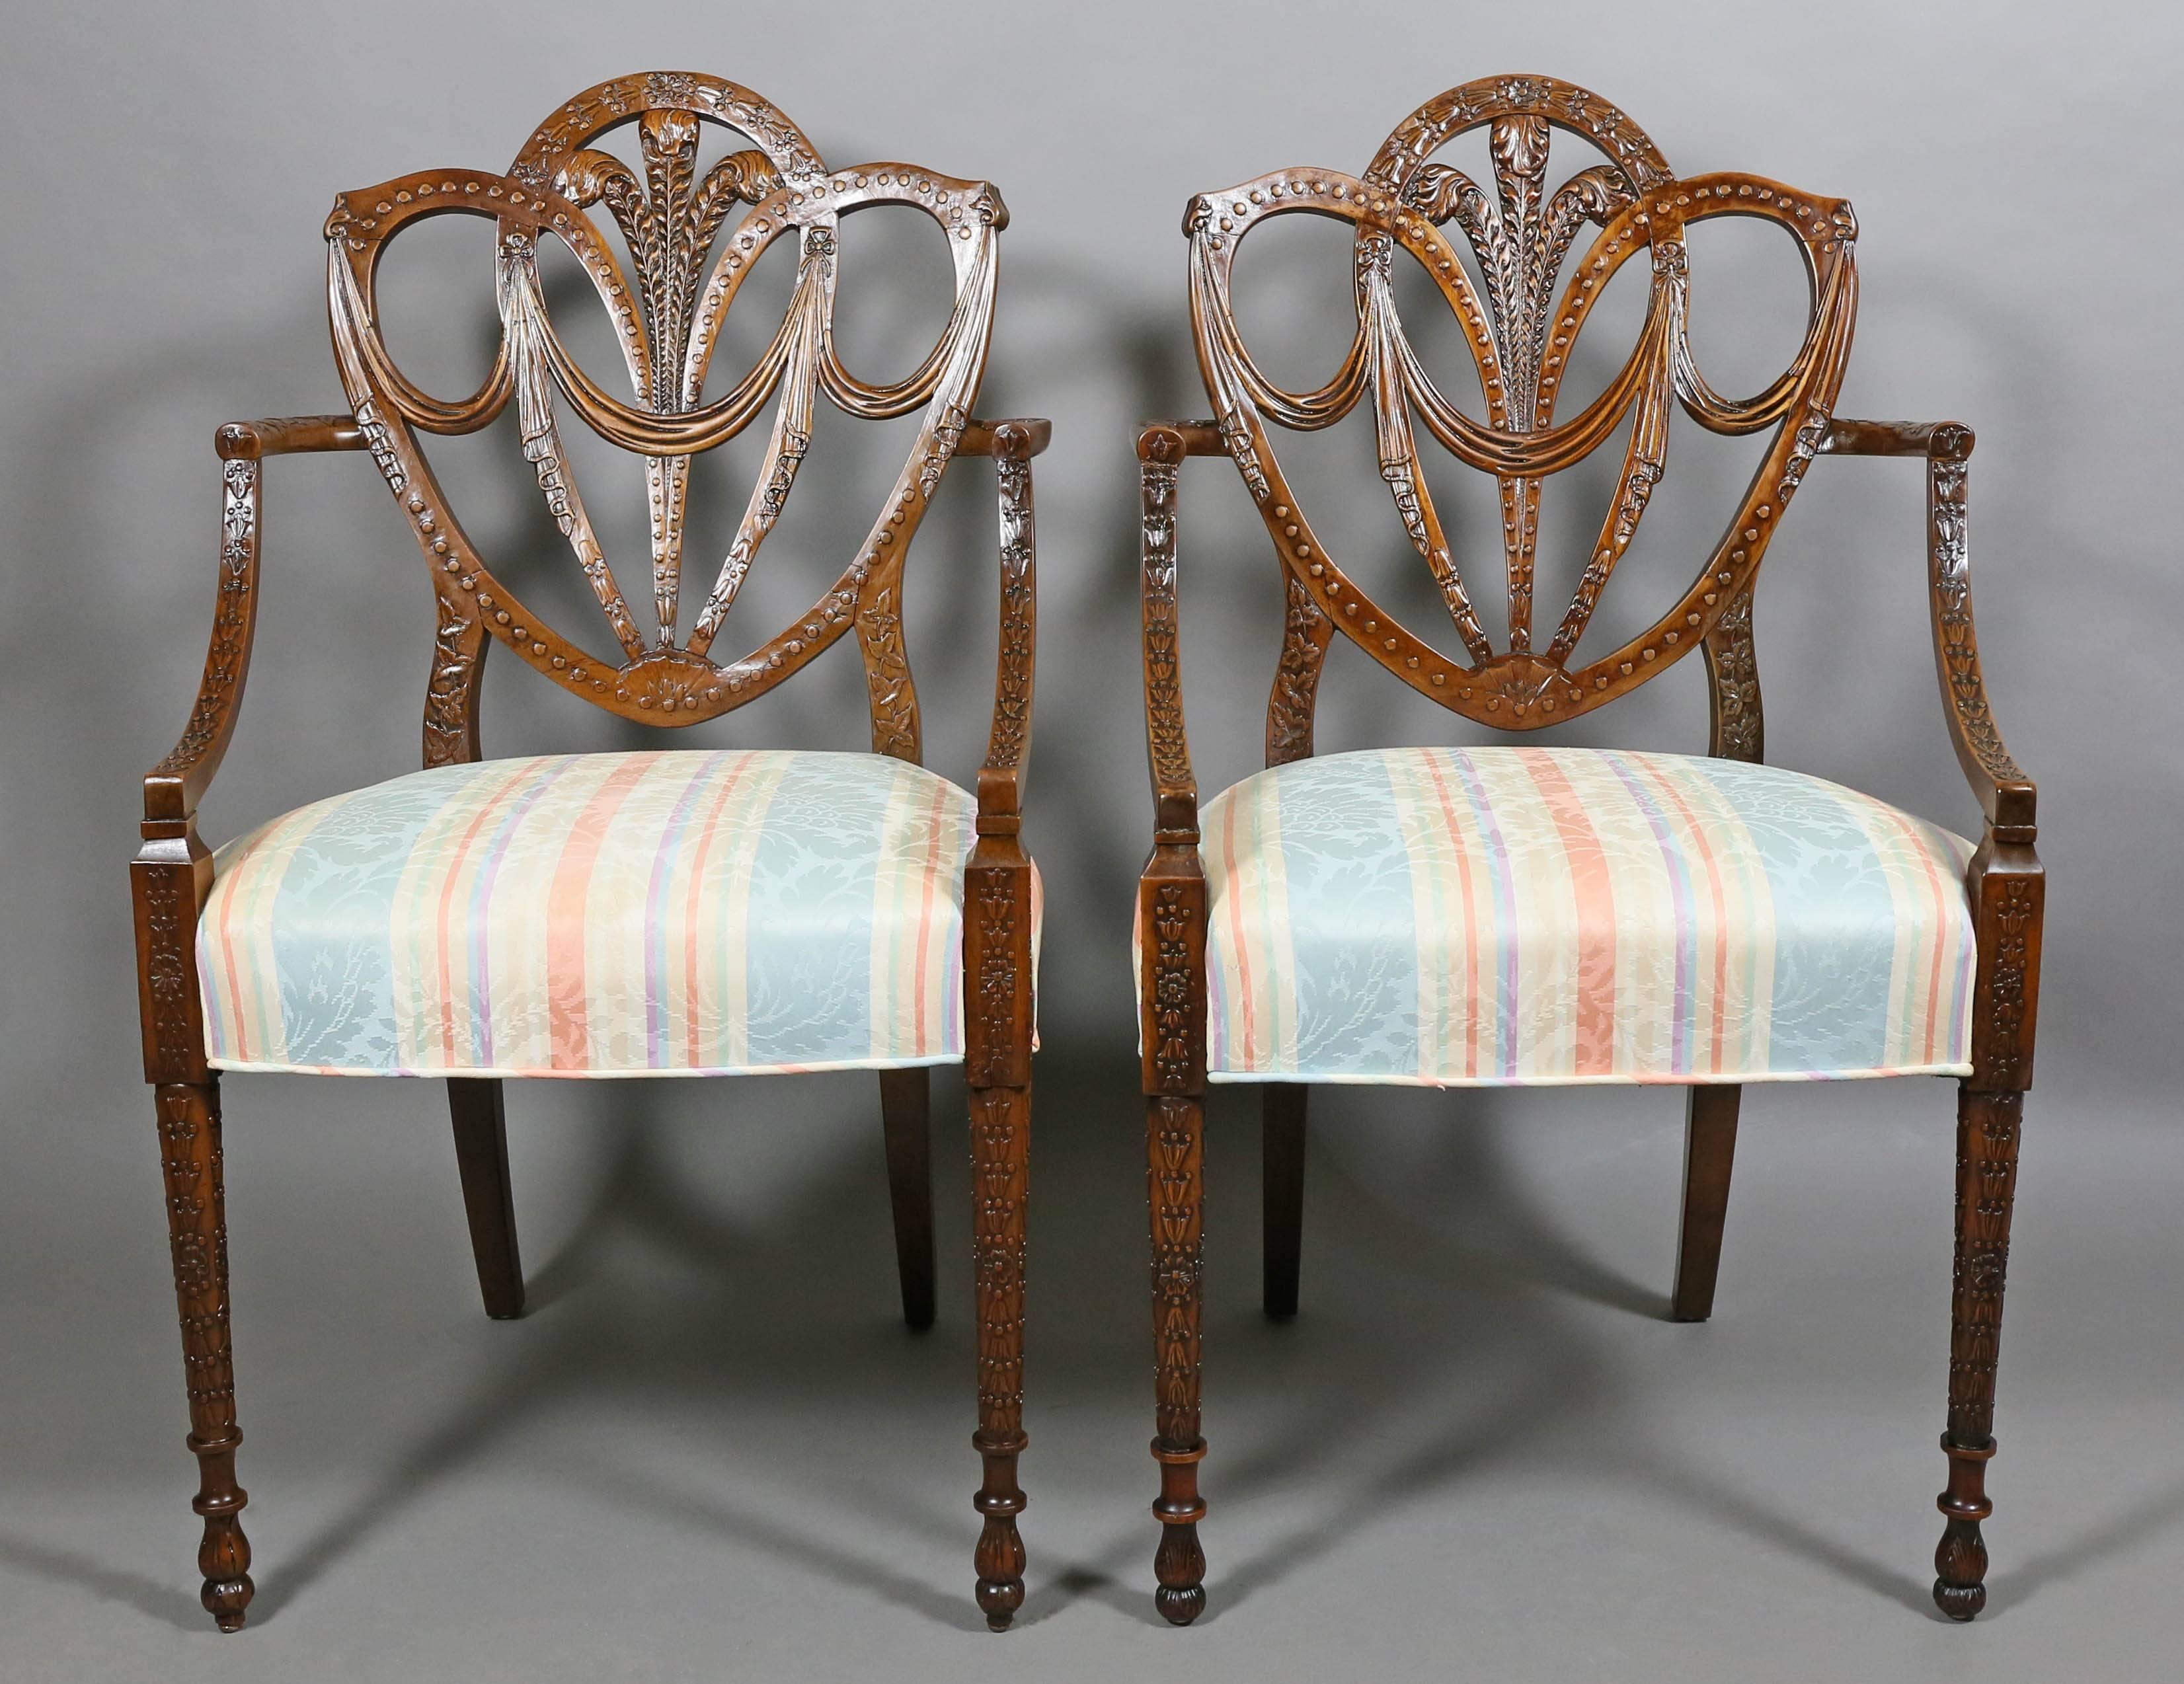 Each with shield back with Prince of Wales plumes, carved with bellflowers and swags, bowed upholstered seat, raised on circular tapered legs. Provenance; Crane Estate.